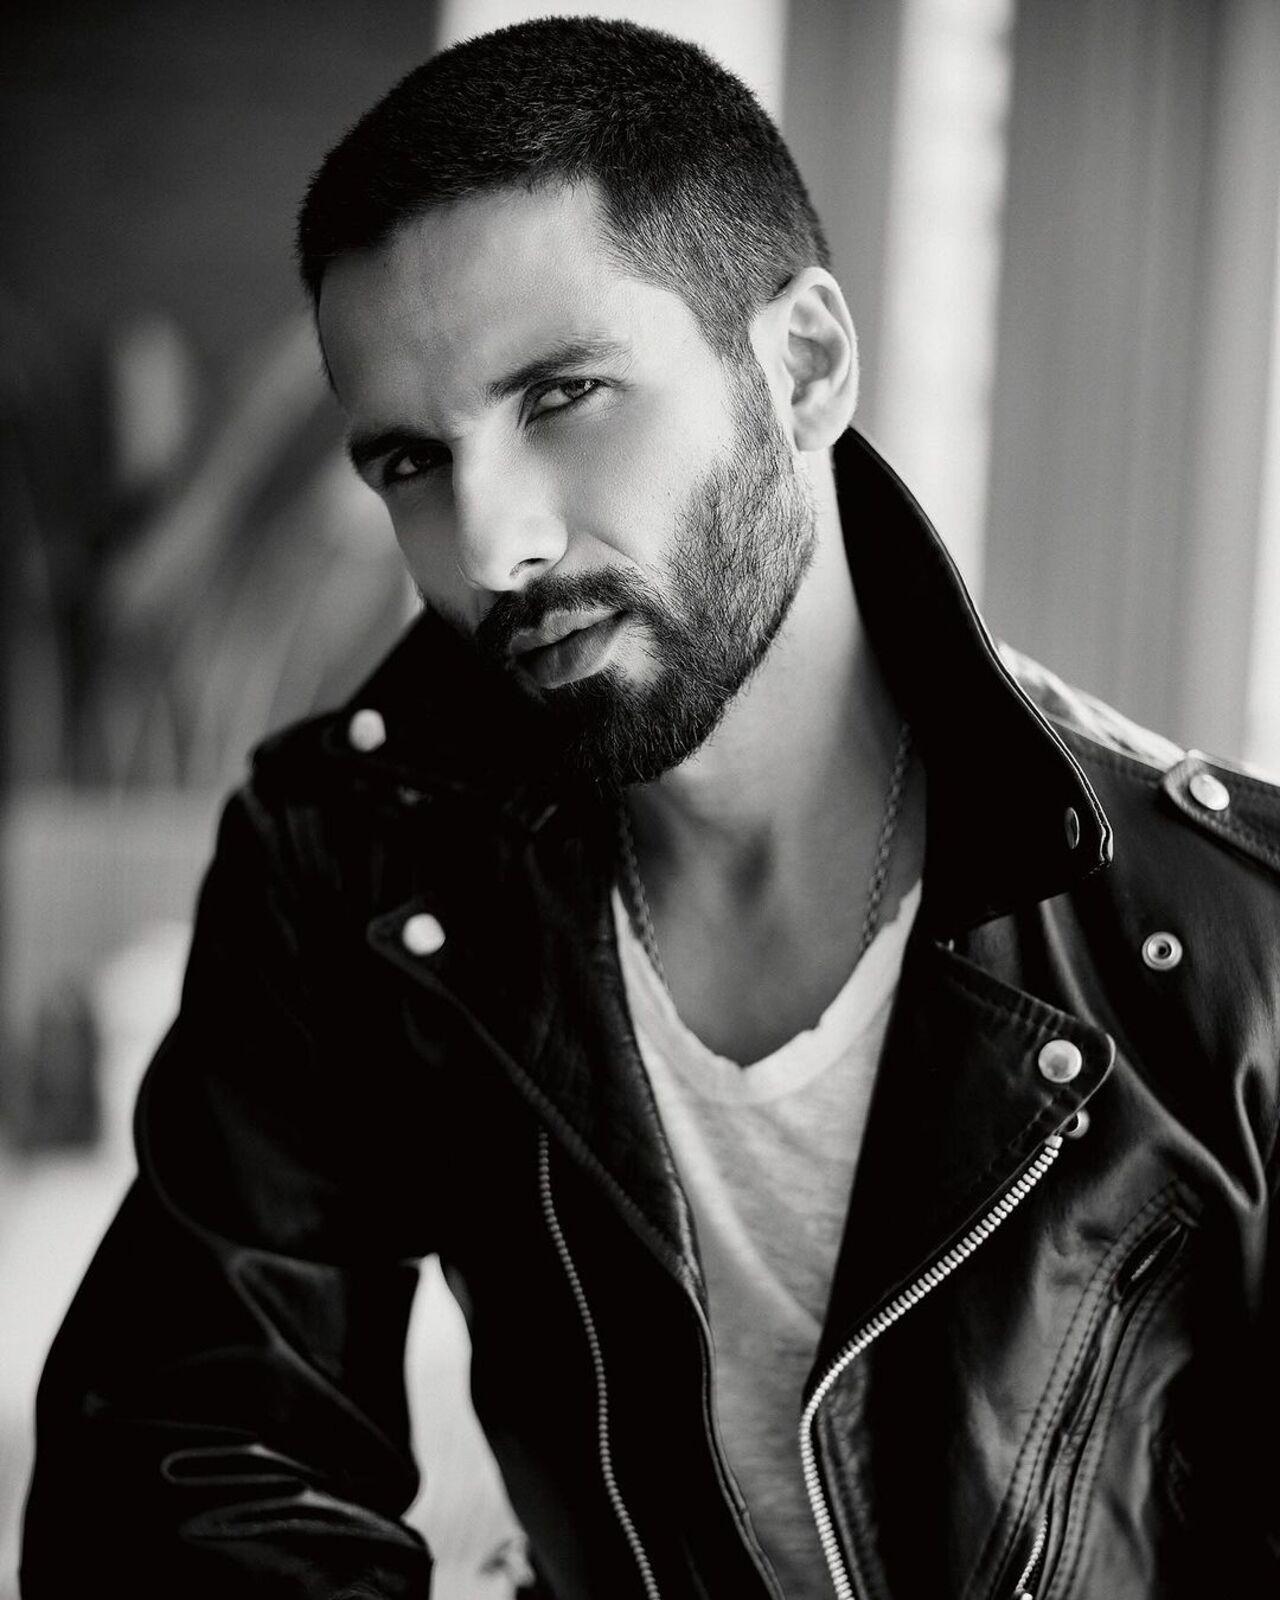 Not just suits, but Shahid Kapoor needs just a leather jacket to look equally stylish